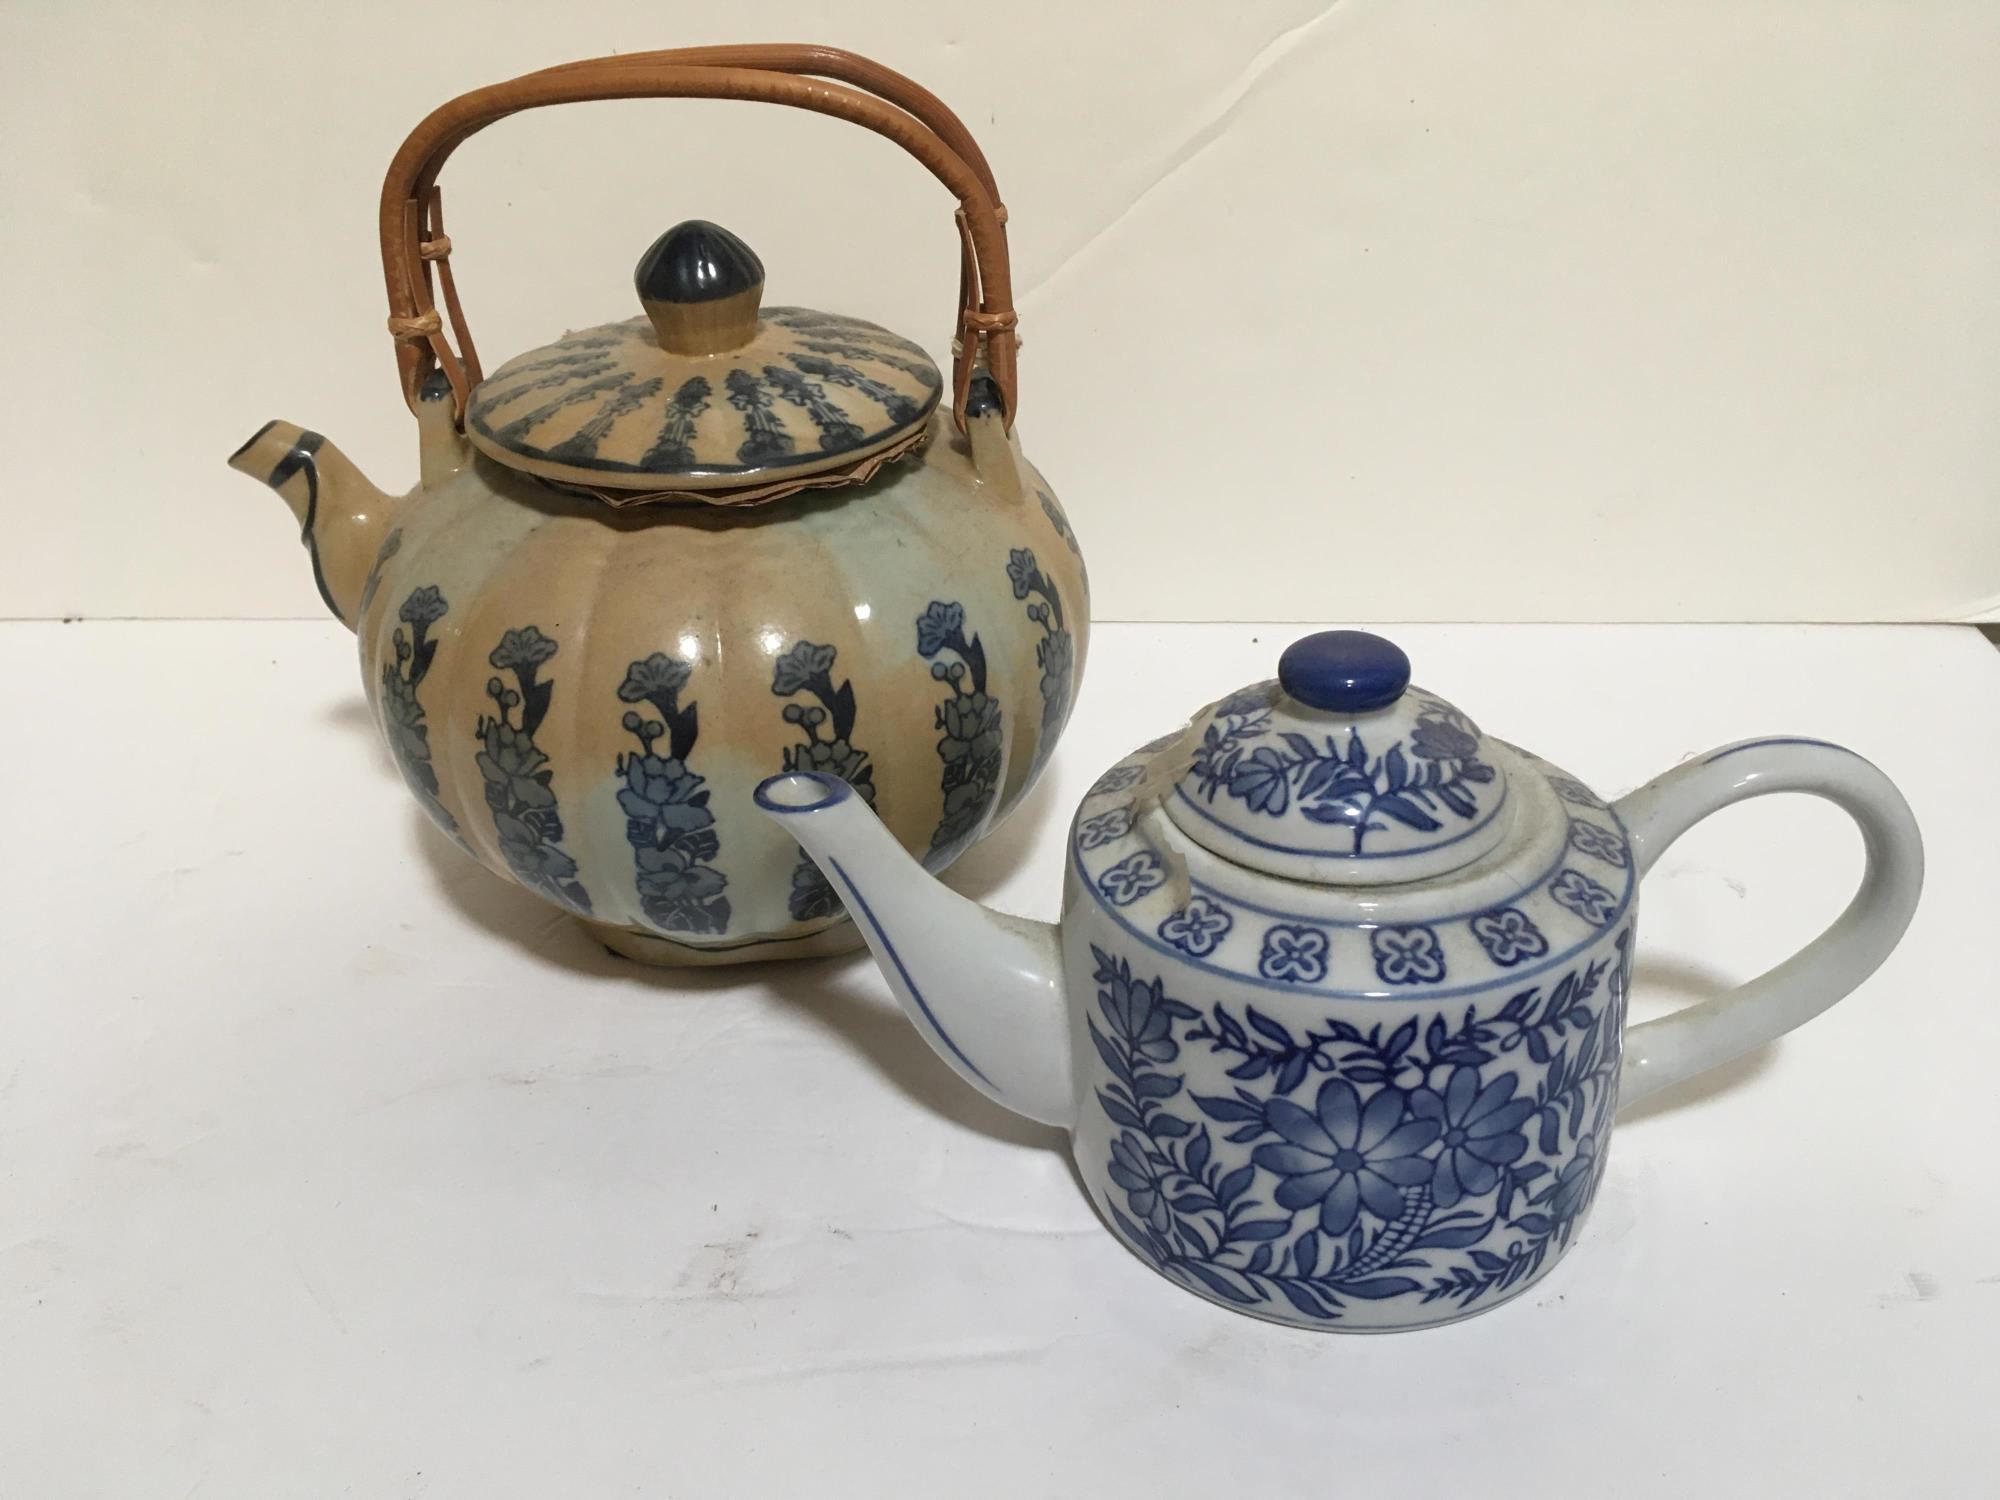 PAIR OF BLUE AND WHITE TEAPOTS